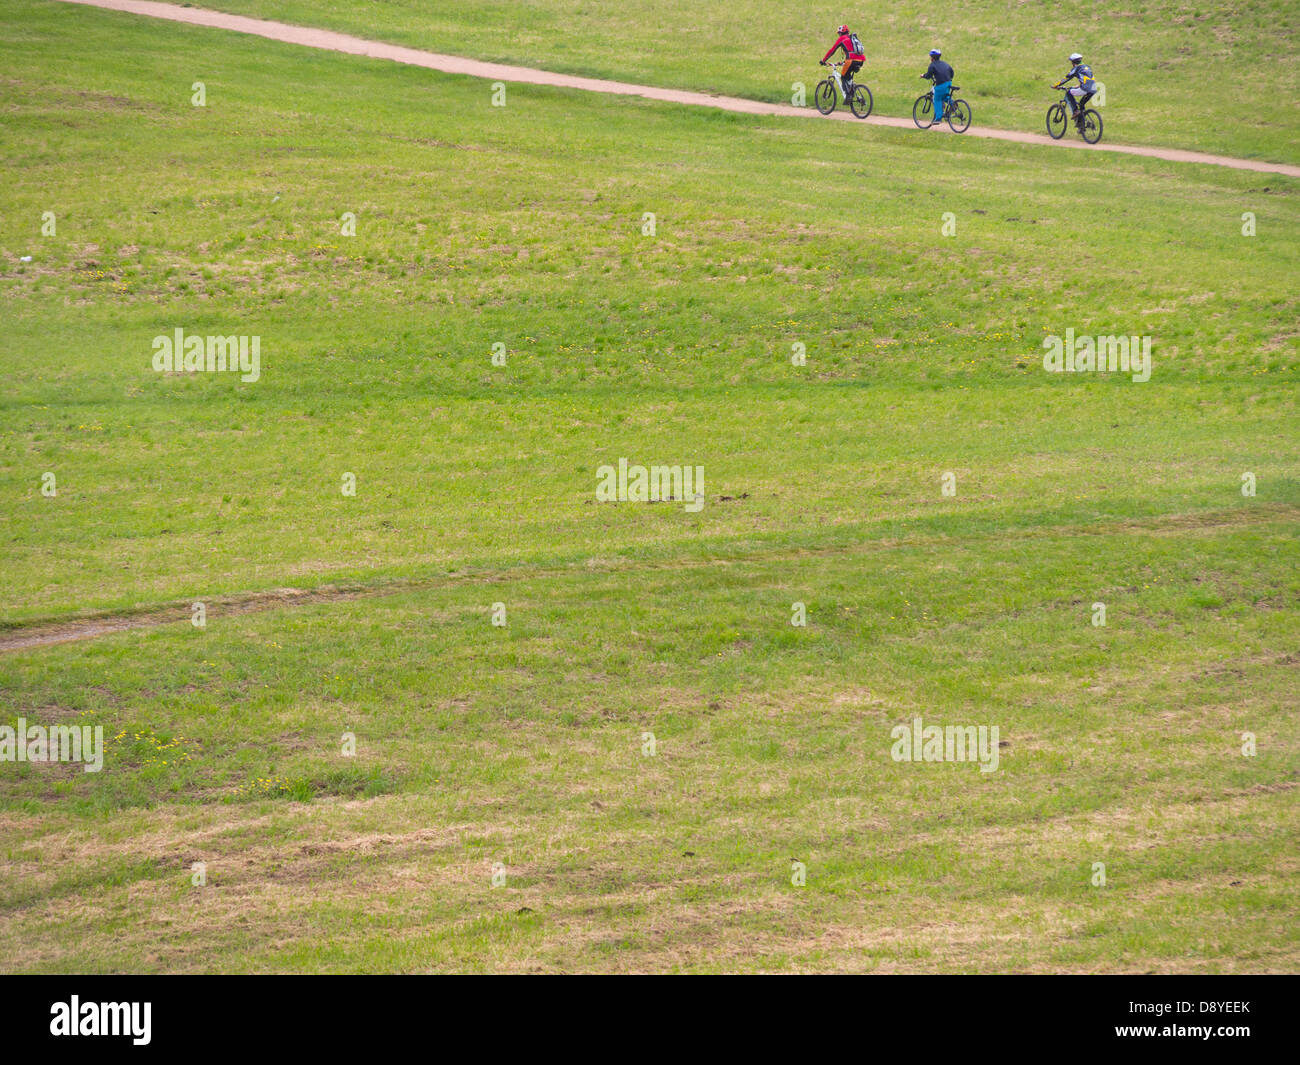 People riding bicycles in the countryside Stock Photo